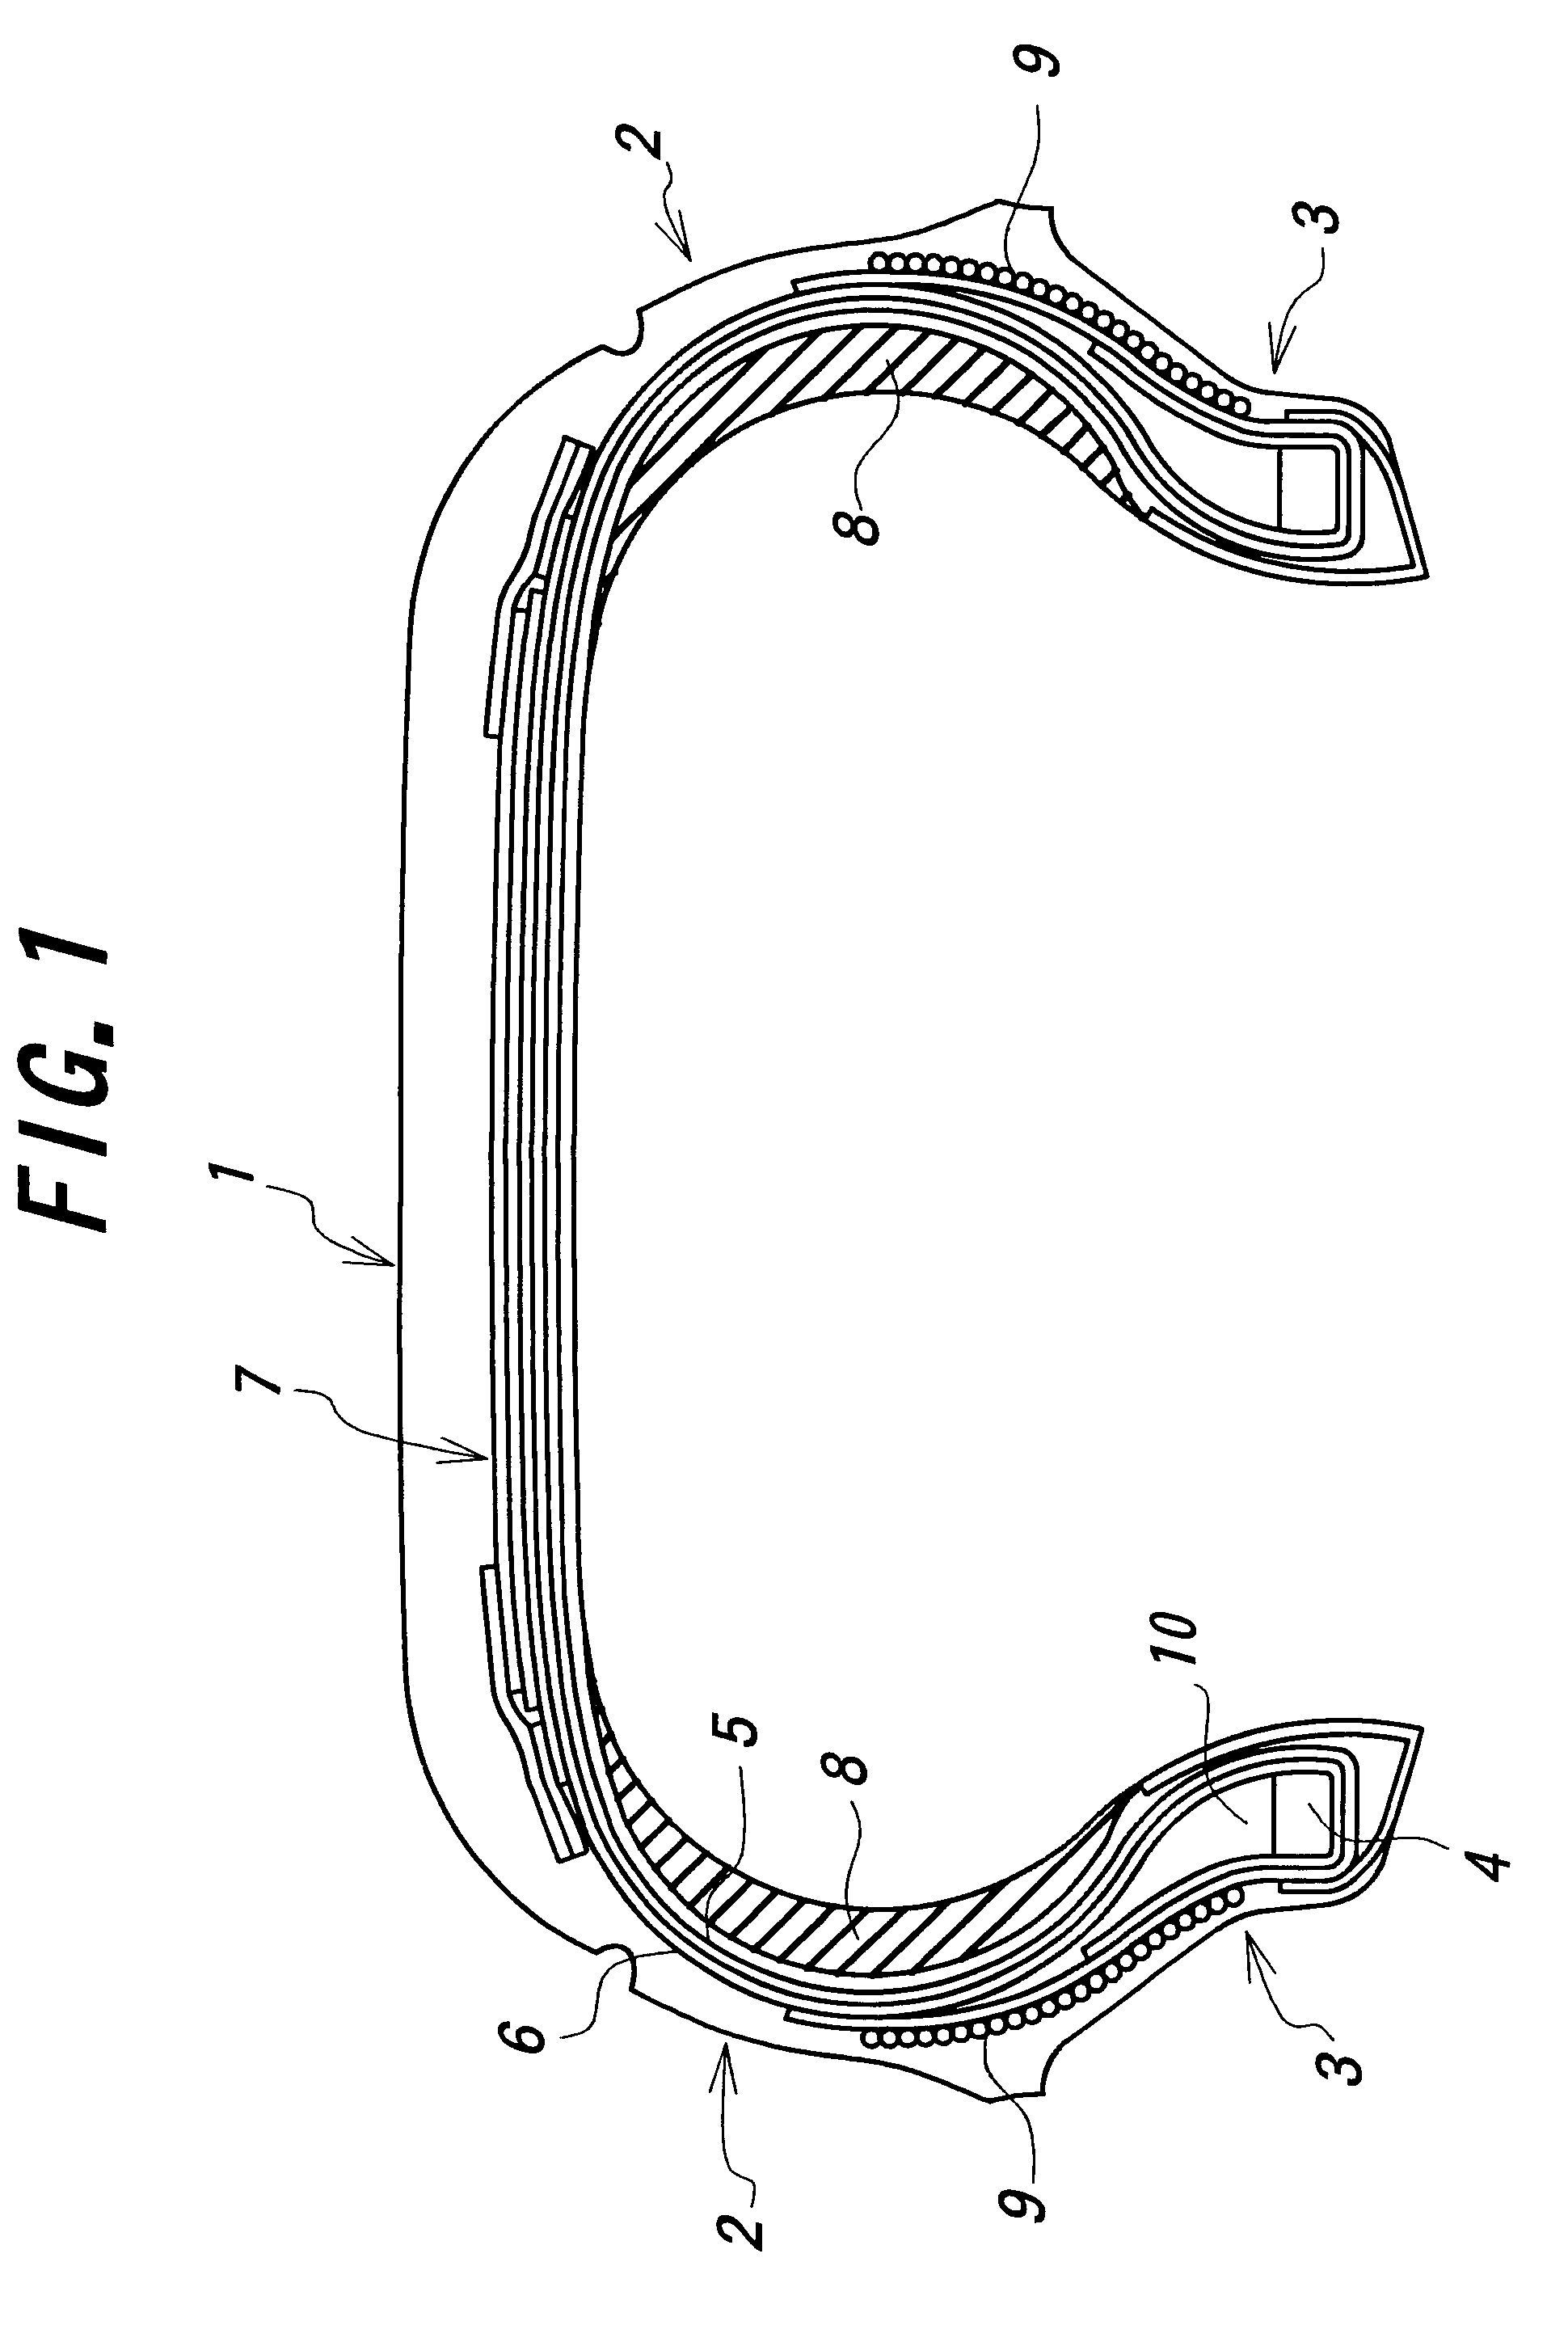 Pneumatic tire with sidewall reinforcing rubber and bead reinforcing layer of approximately circumferential cords